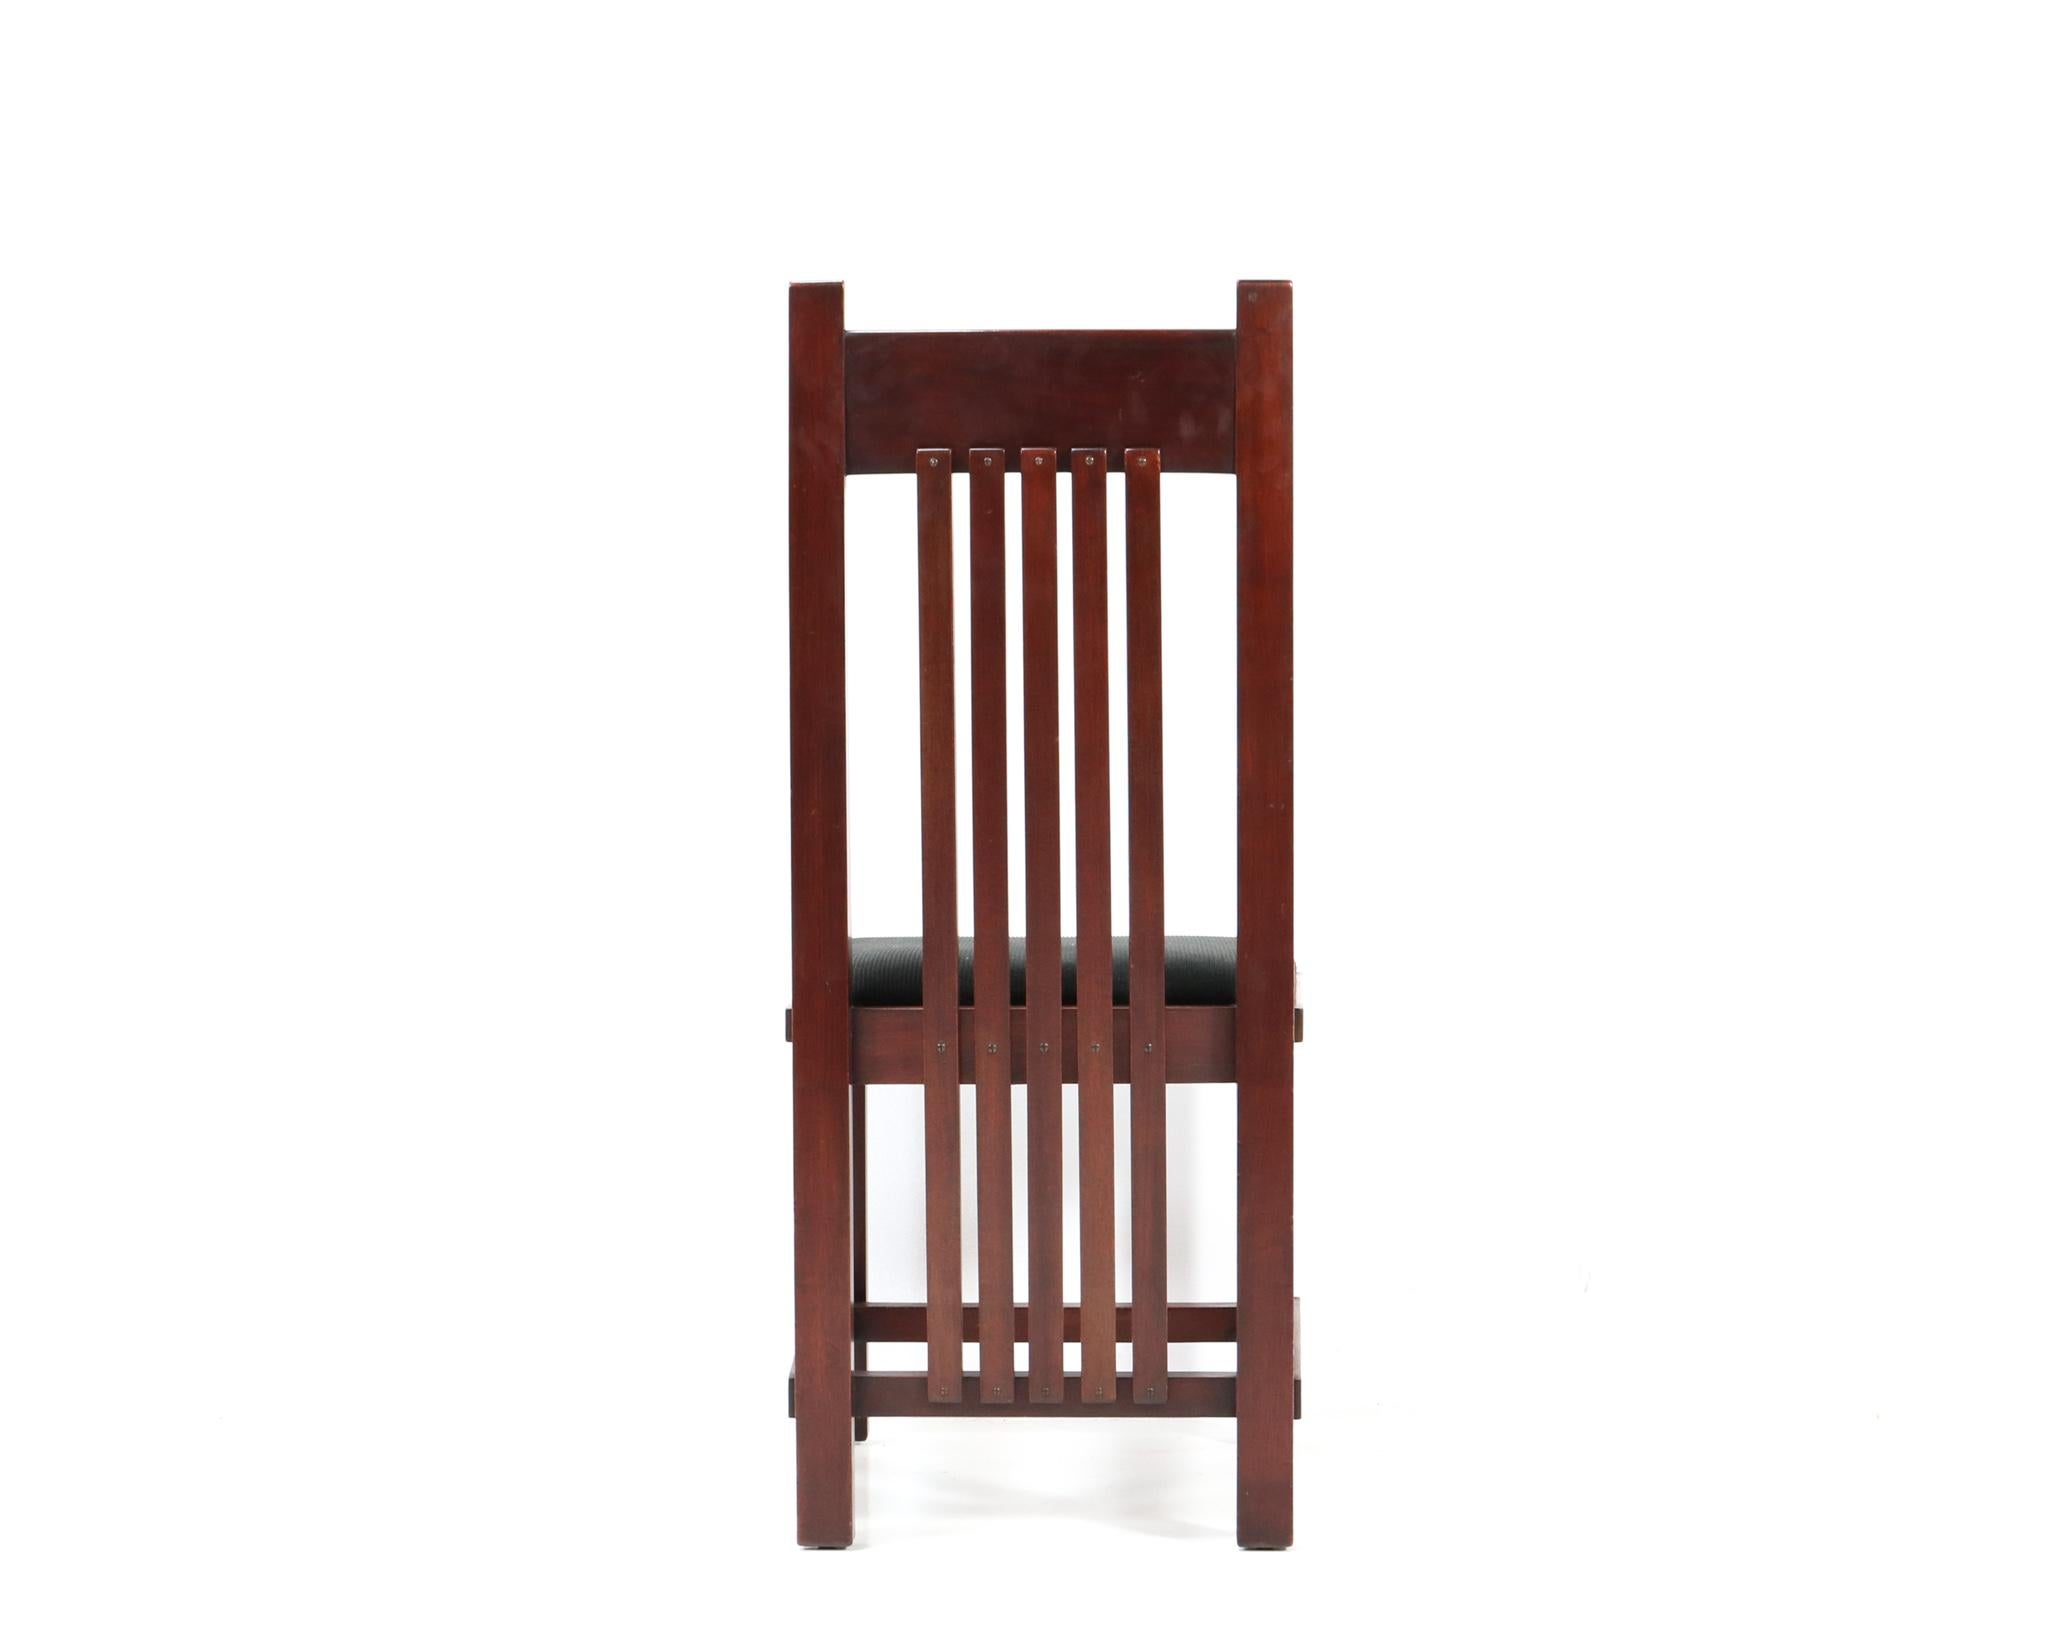 Mahogany Art Deco Modernist High Back Chair by Hendrik Wouda for Pander, 1924 For Sale 1